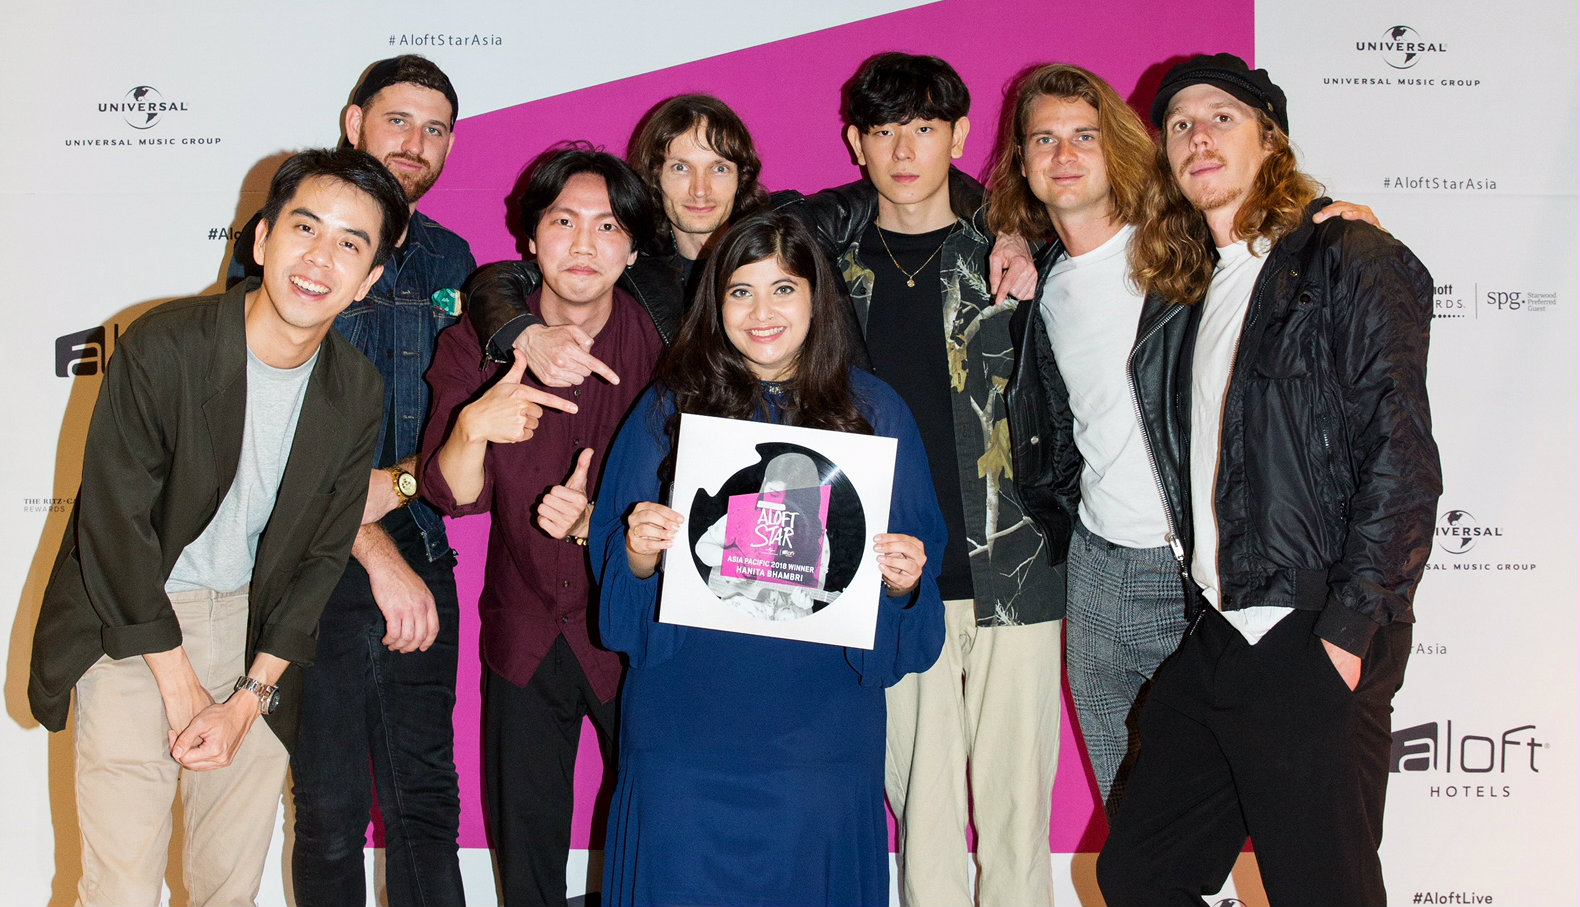 Winner announced for Universal Music & Aloft Hotels ‘Project: Aloft Star Asia Pacific’